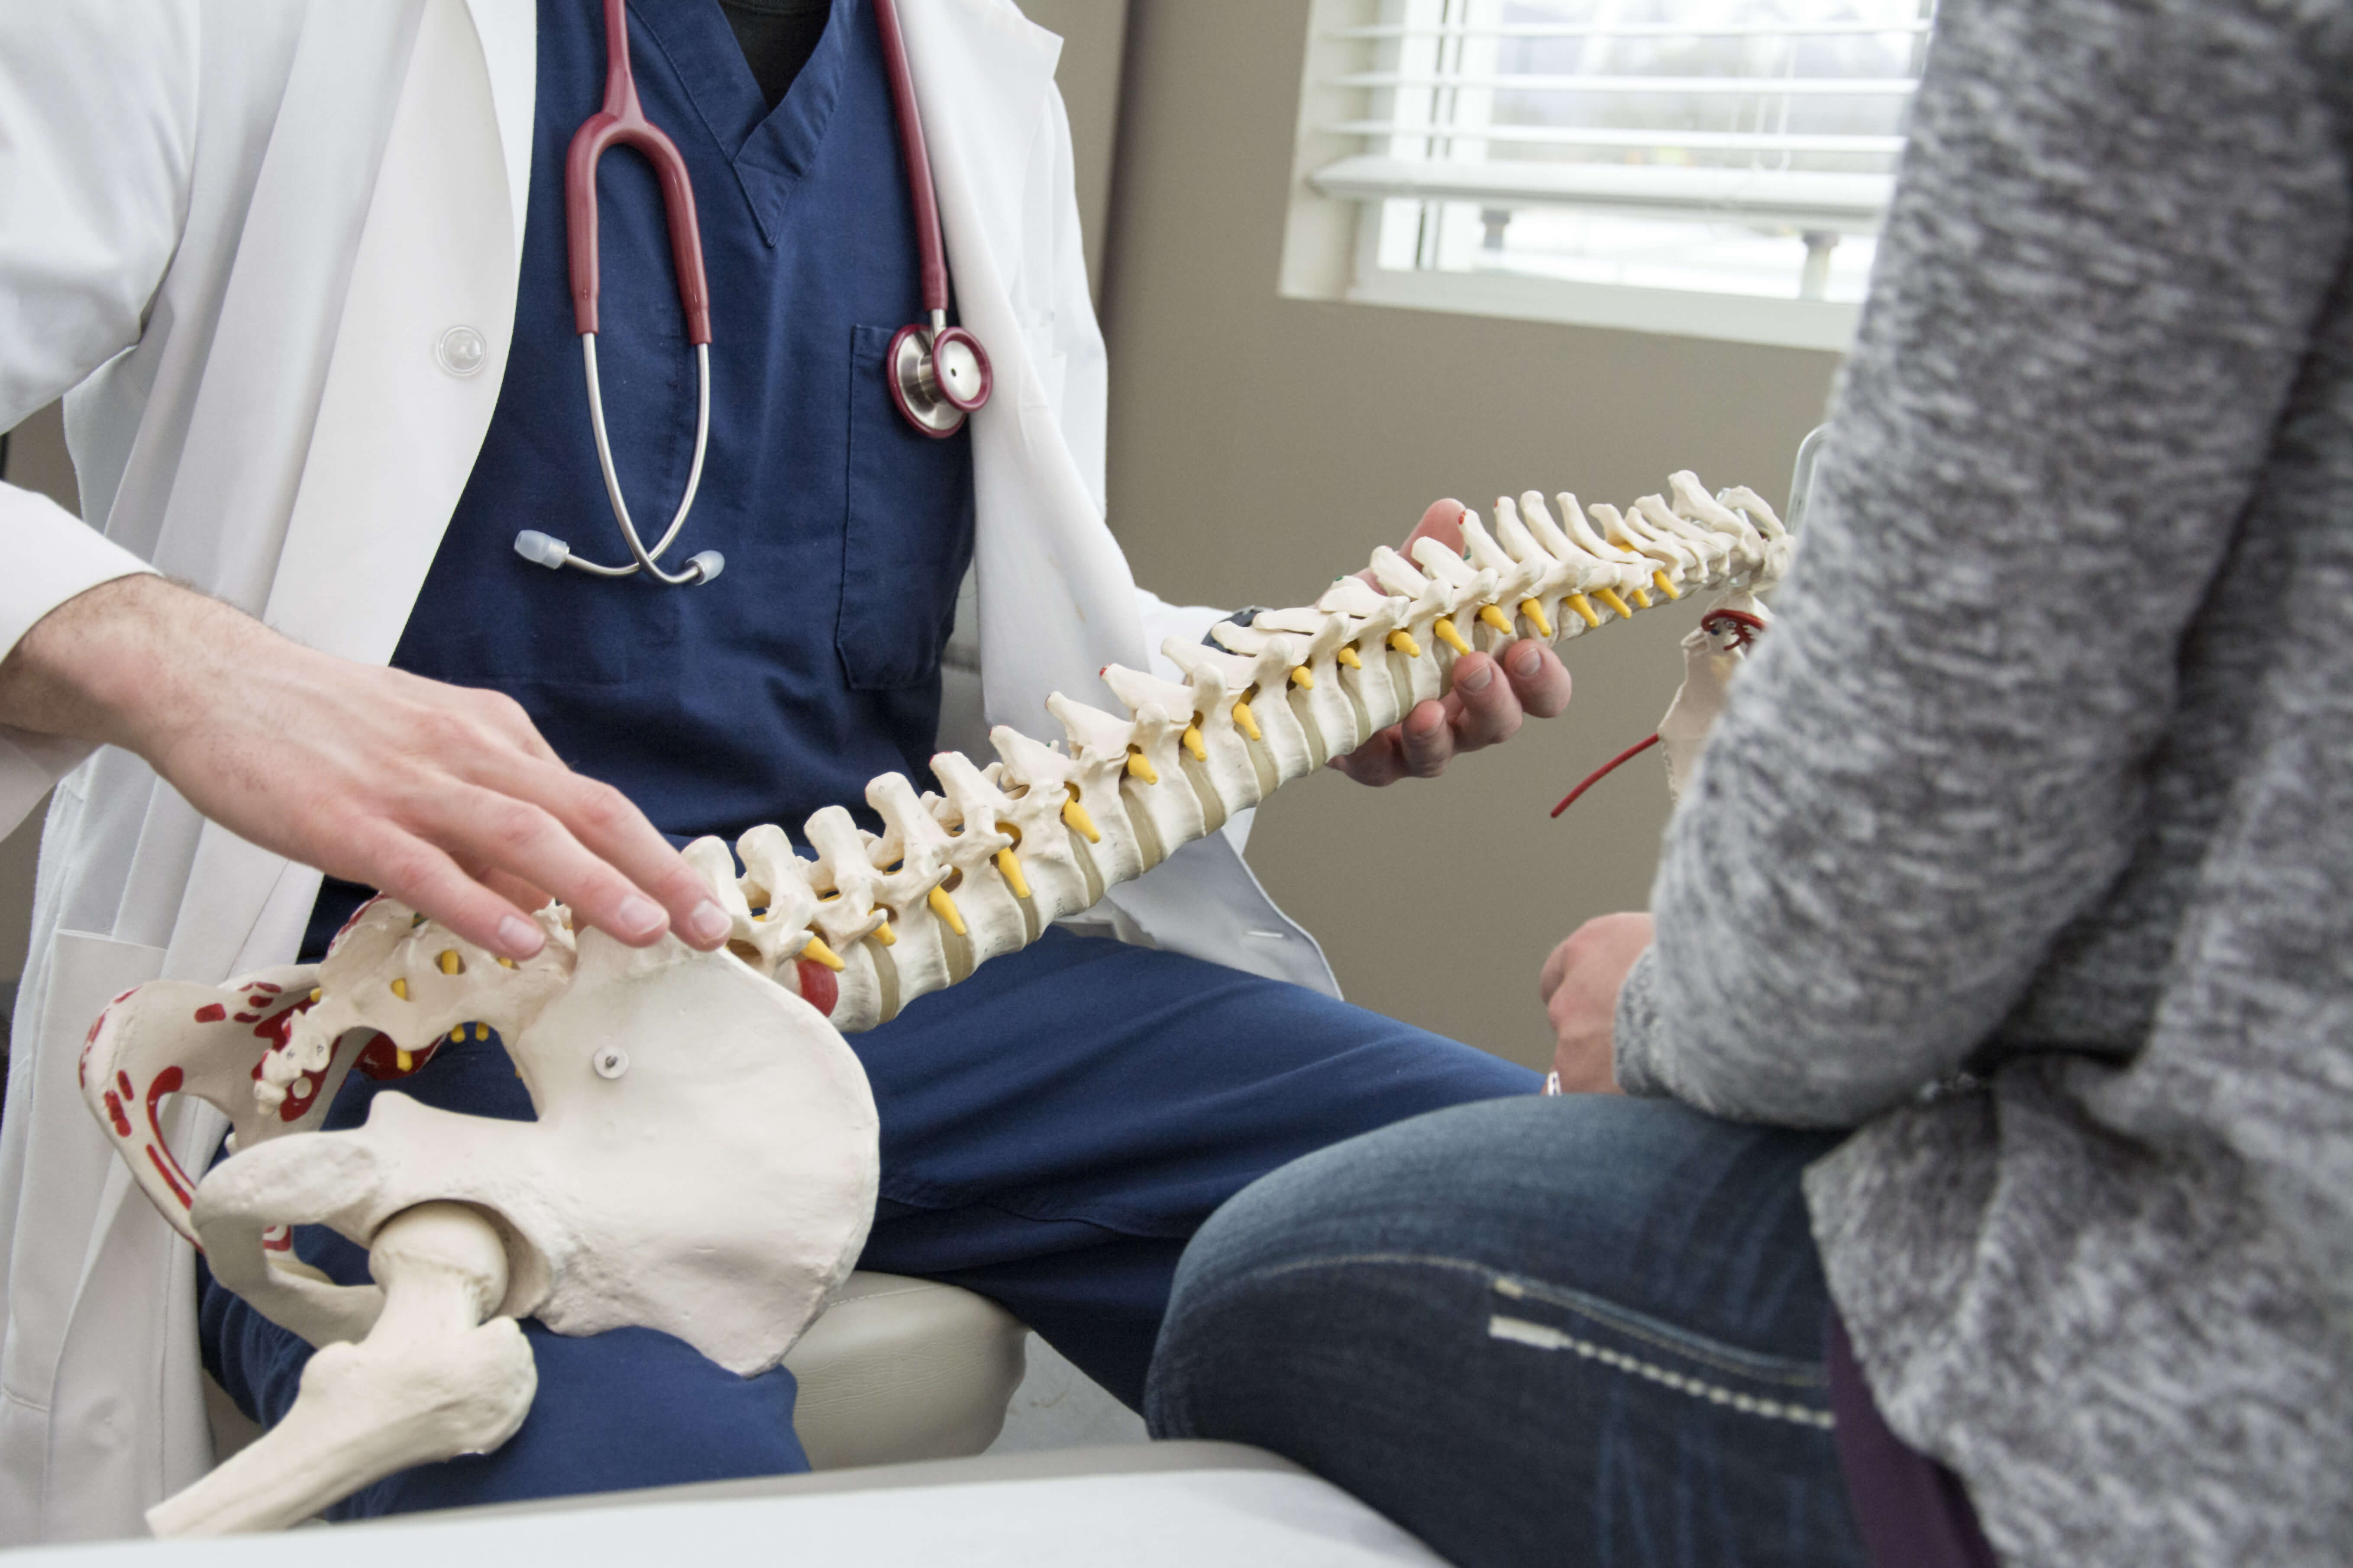 Common Remedy Question : Does Chiropractic Works?